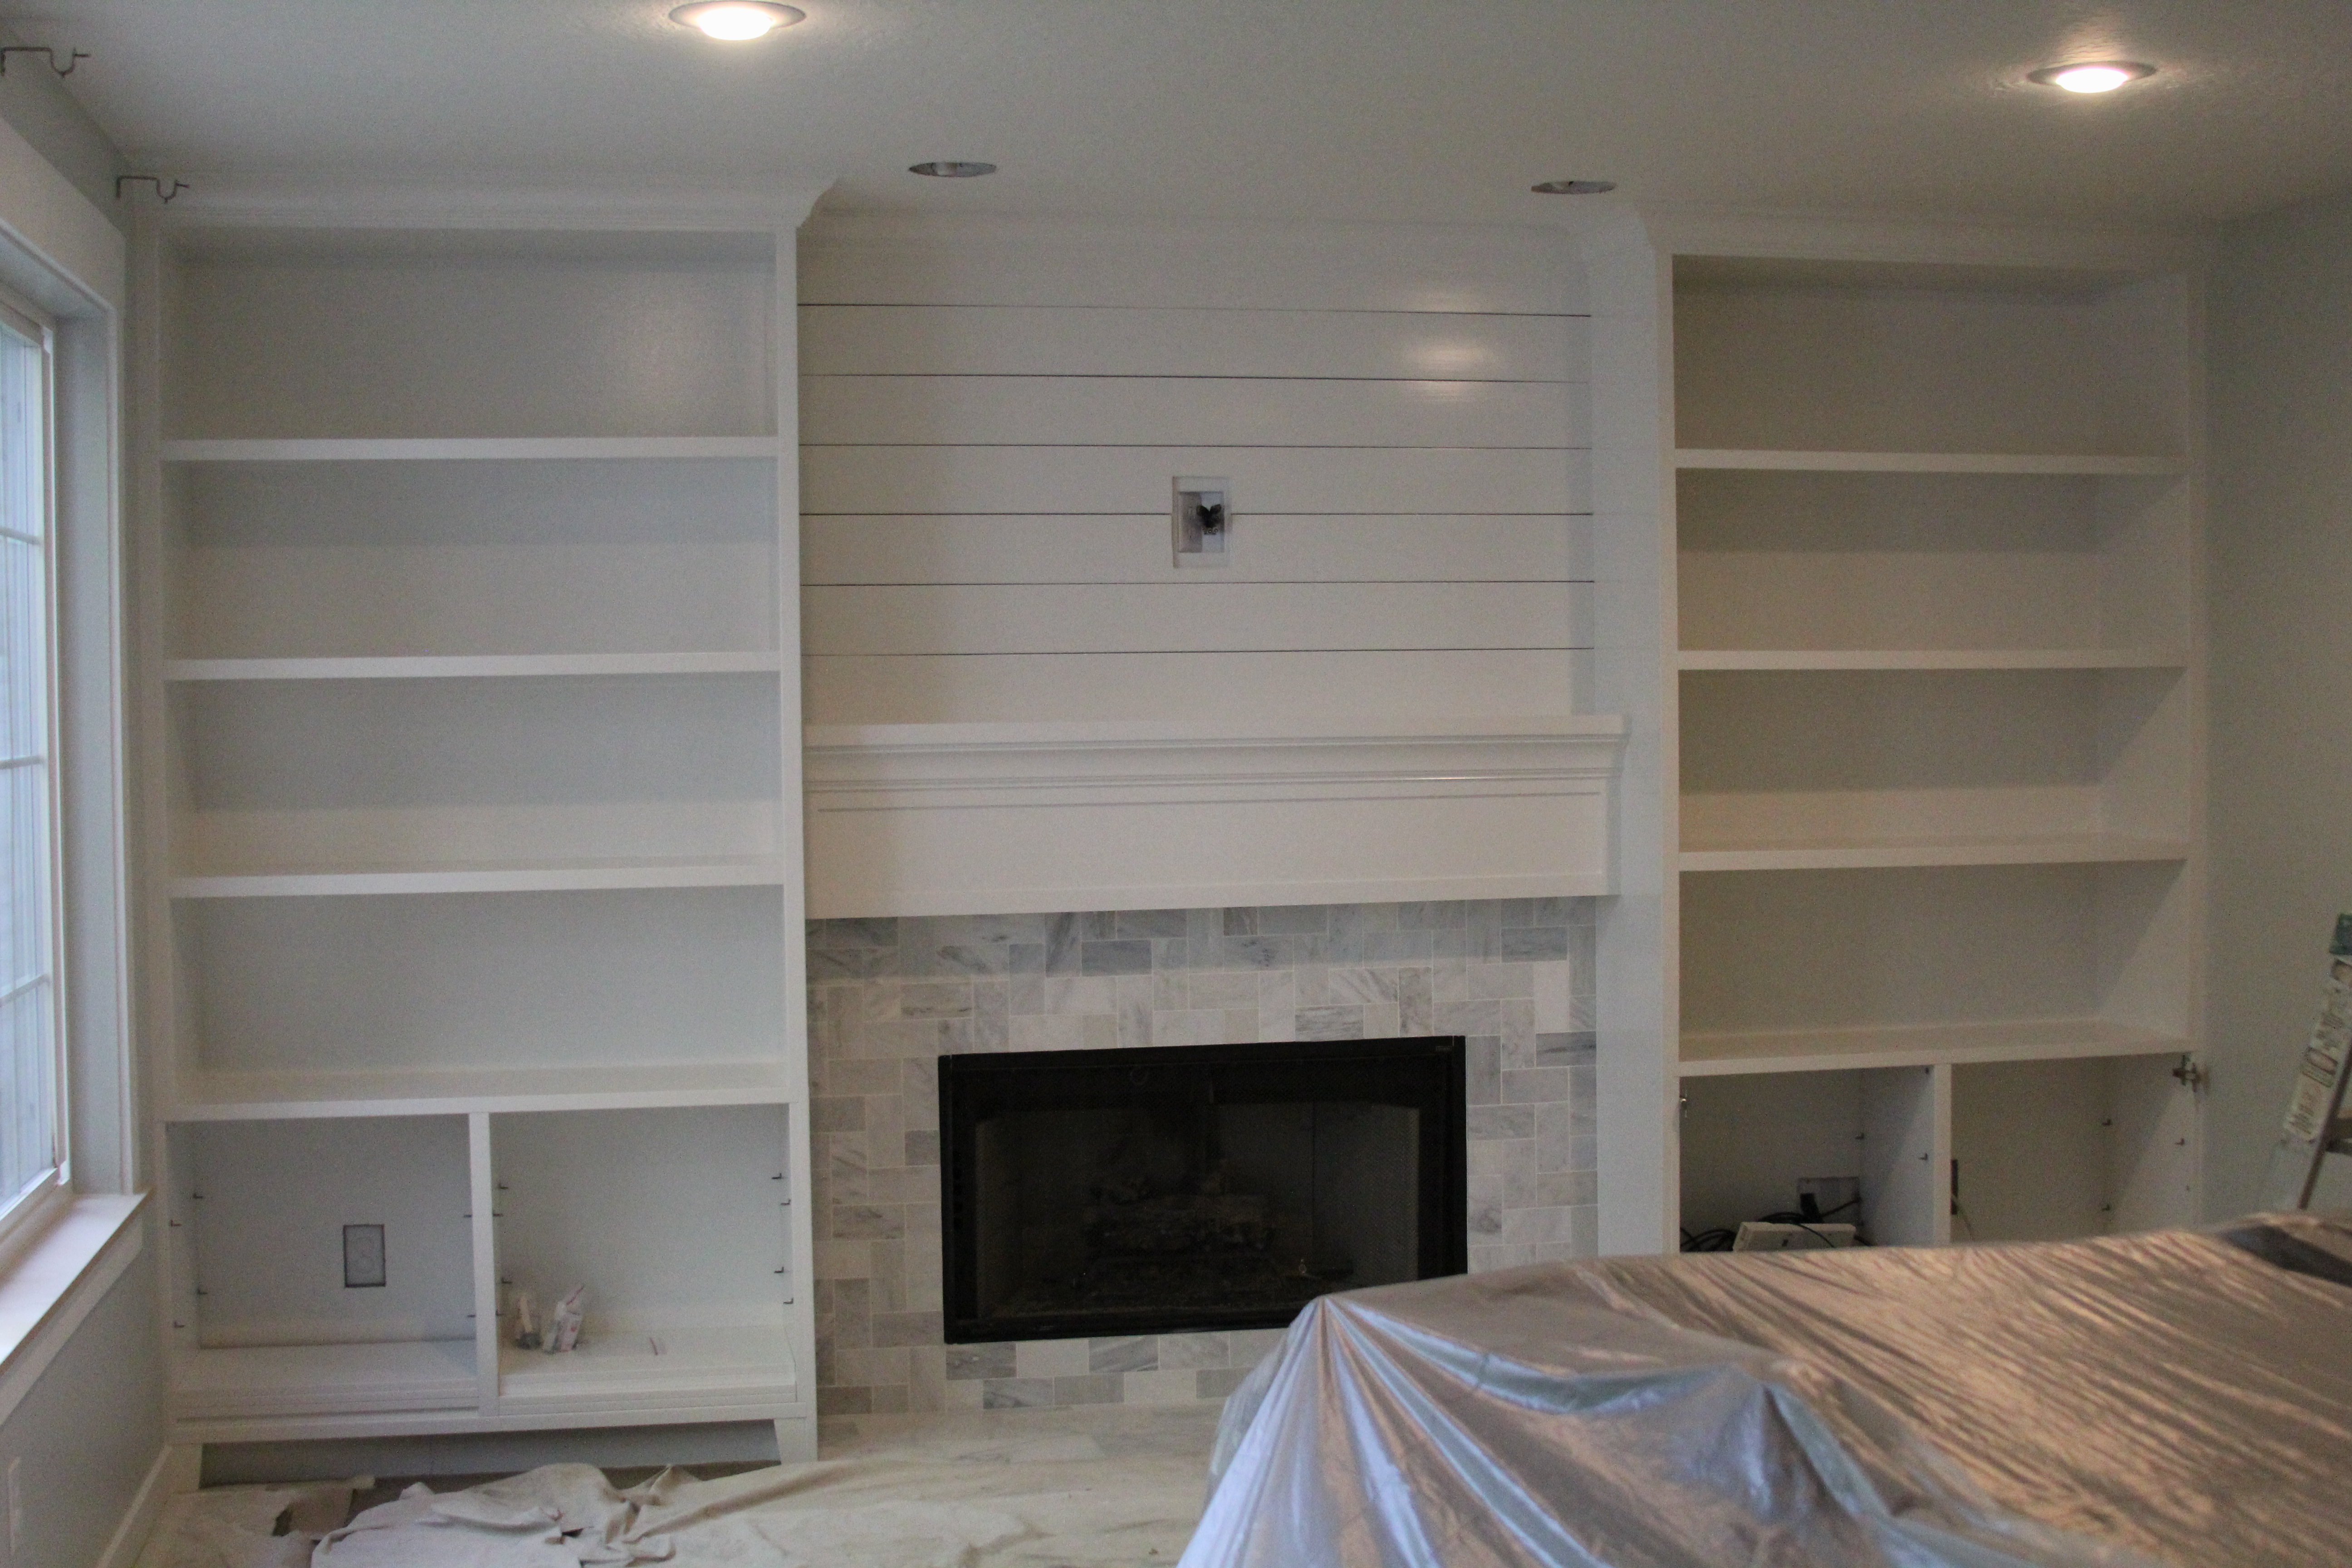 How To Build A Tv Wall Unit With Fireplace, How To Build Wall Shelves Around Fireplace